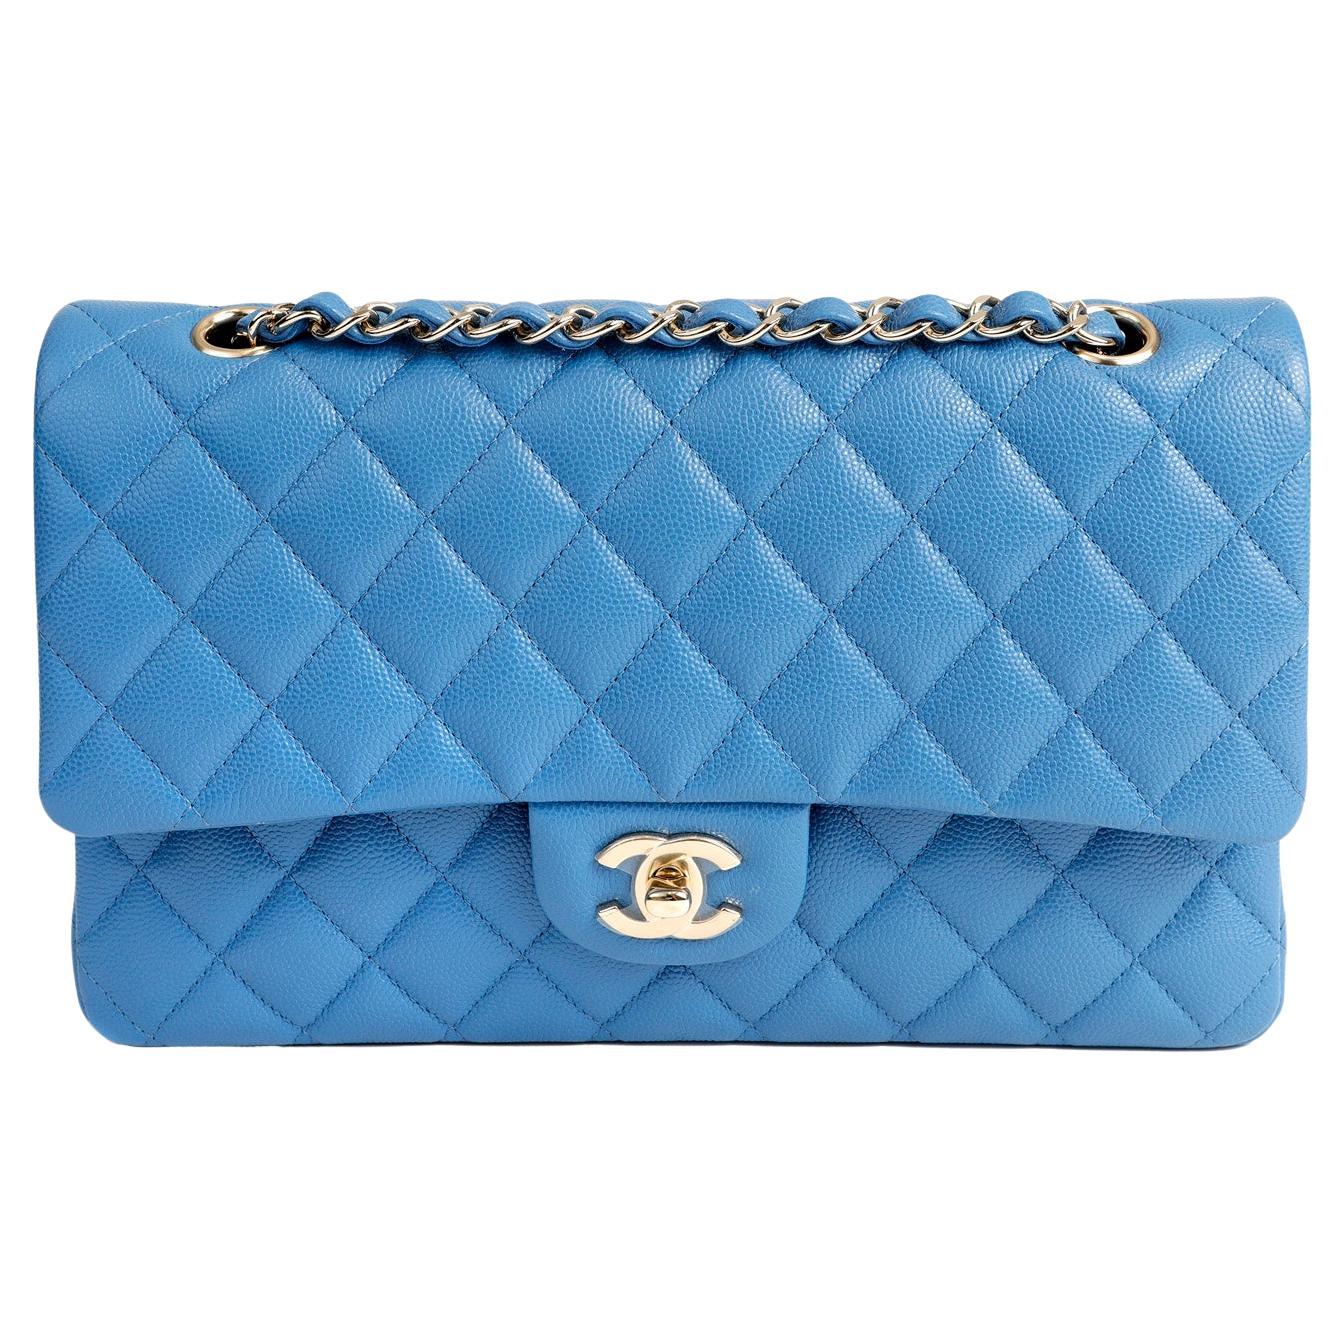 Chanel Periwinkle Caviar Leather Medium Classic Flap Bag at